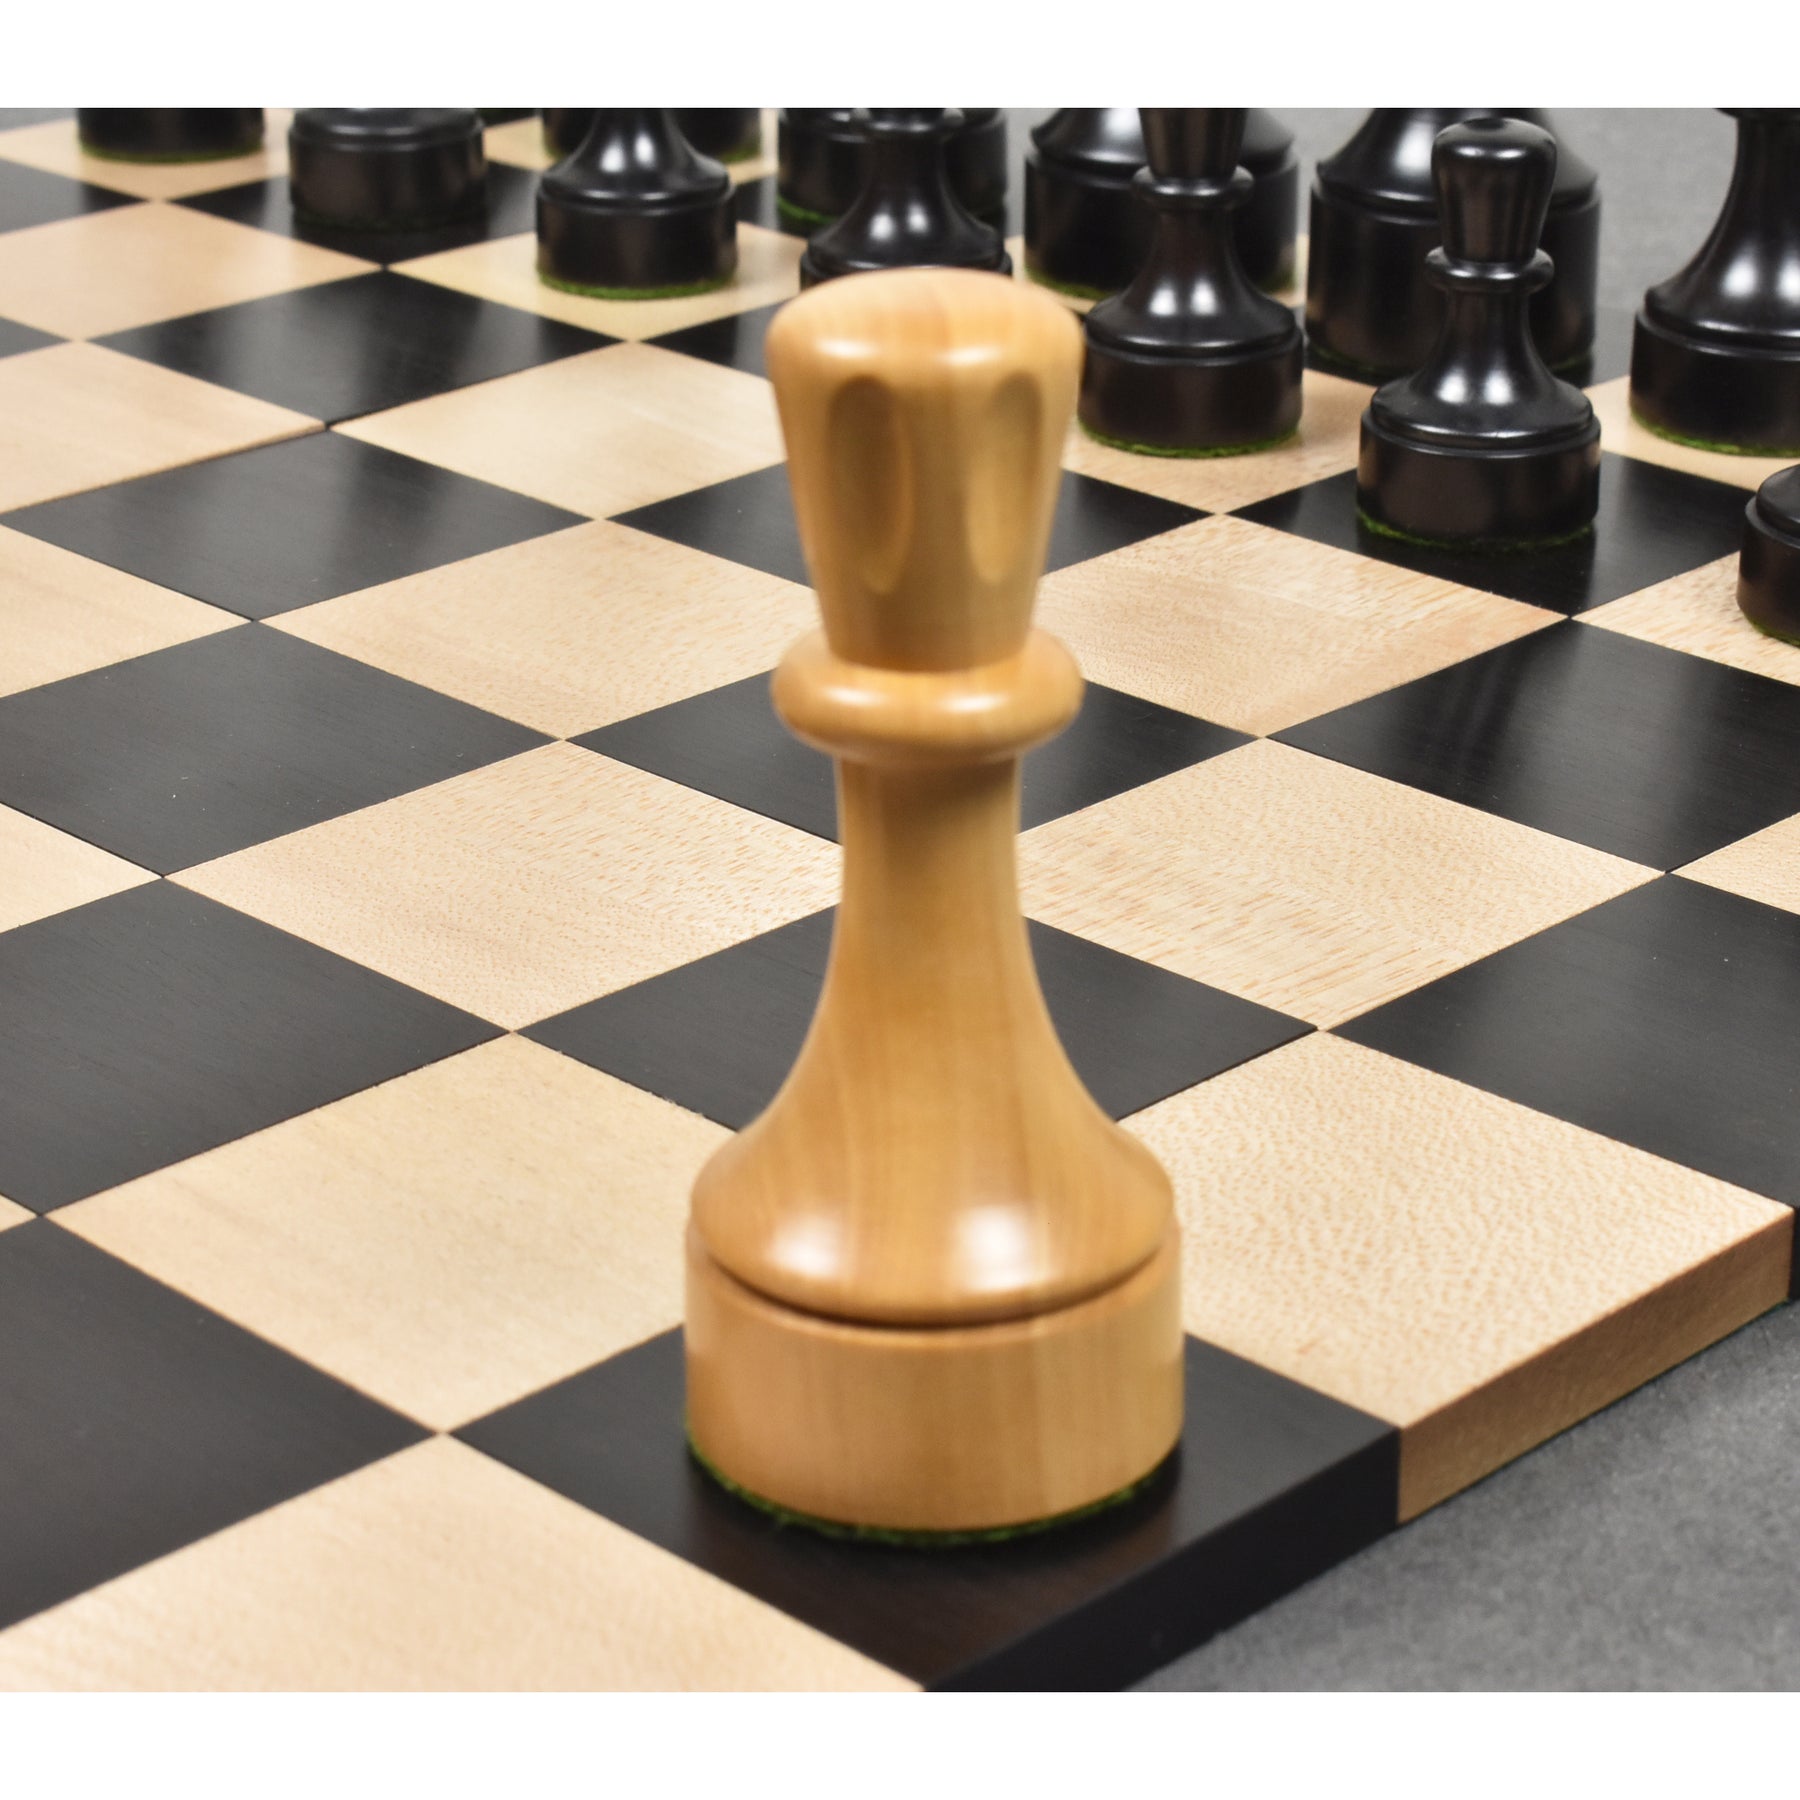 Chess sets with notches on top, do they have a name? - Chess Forums - Chess .com